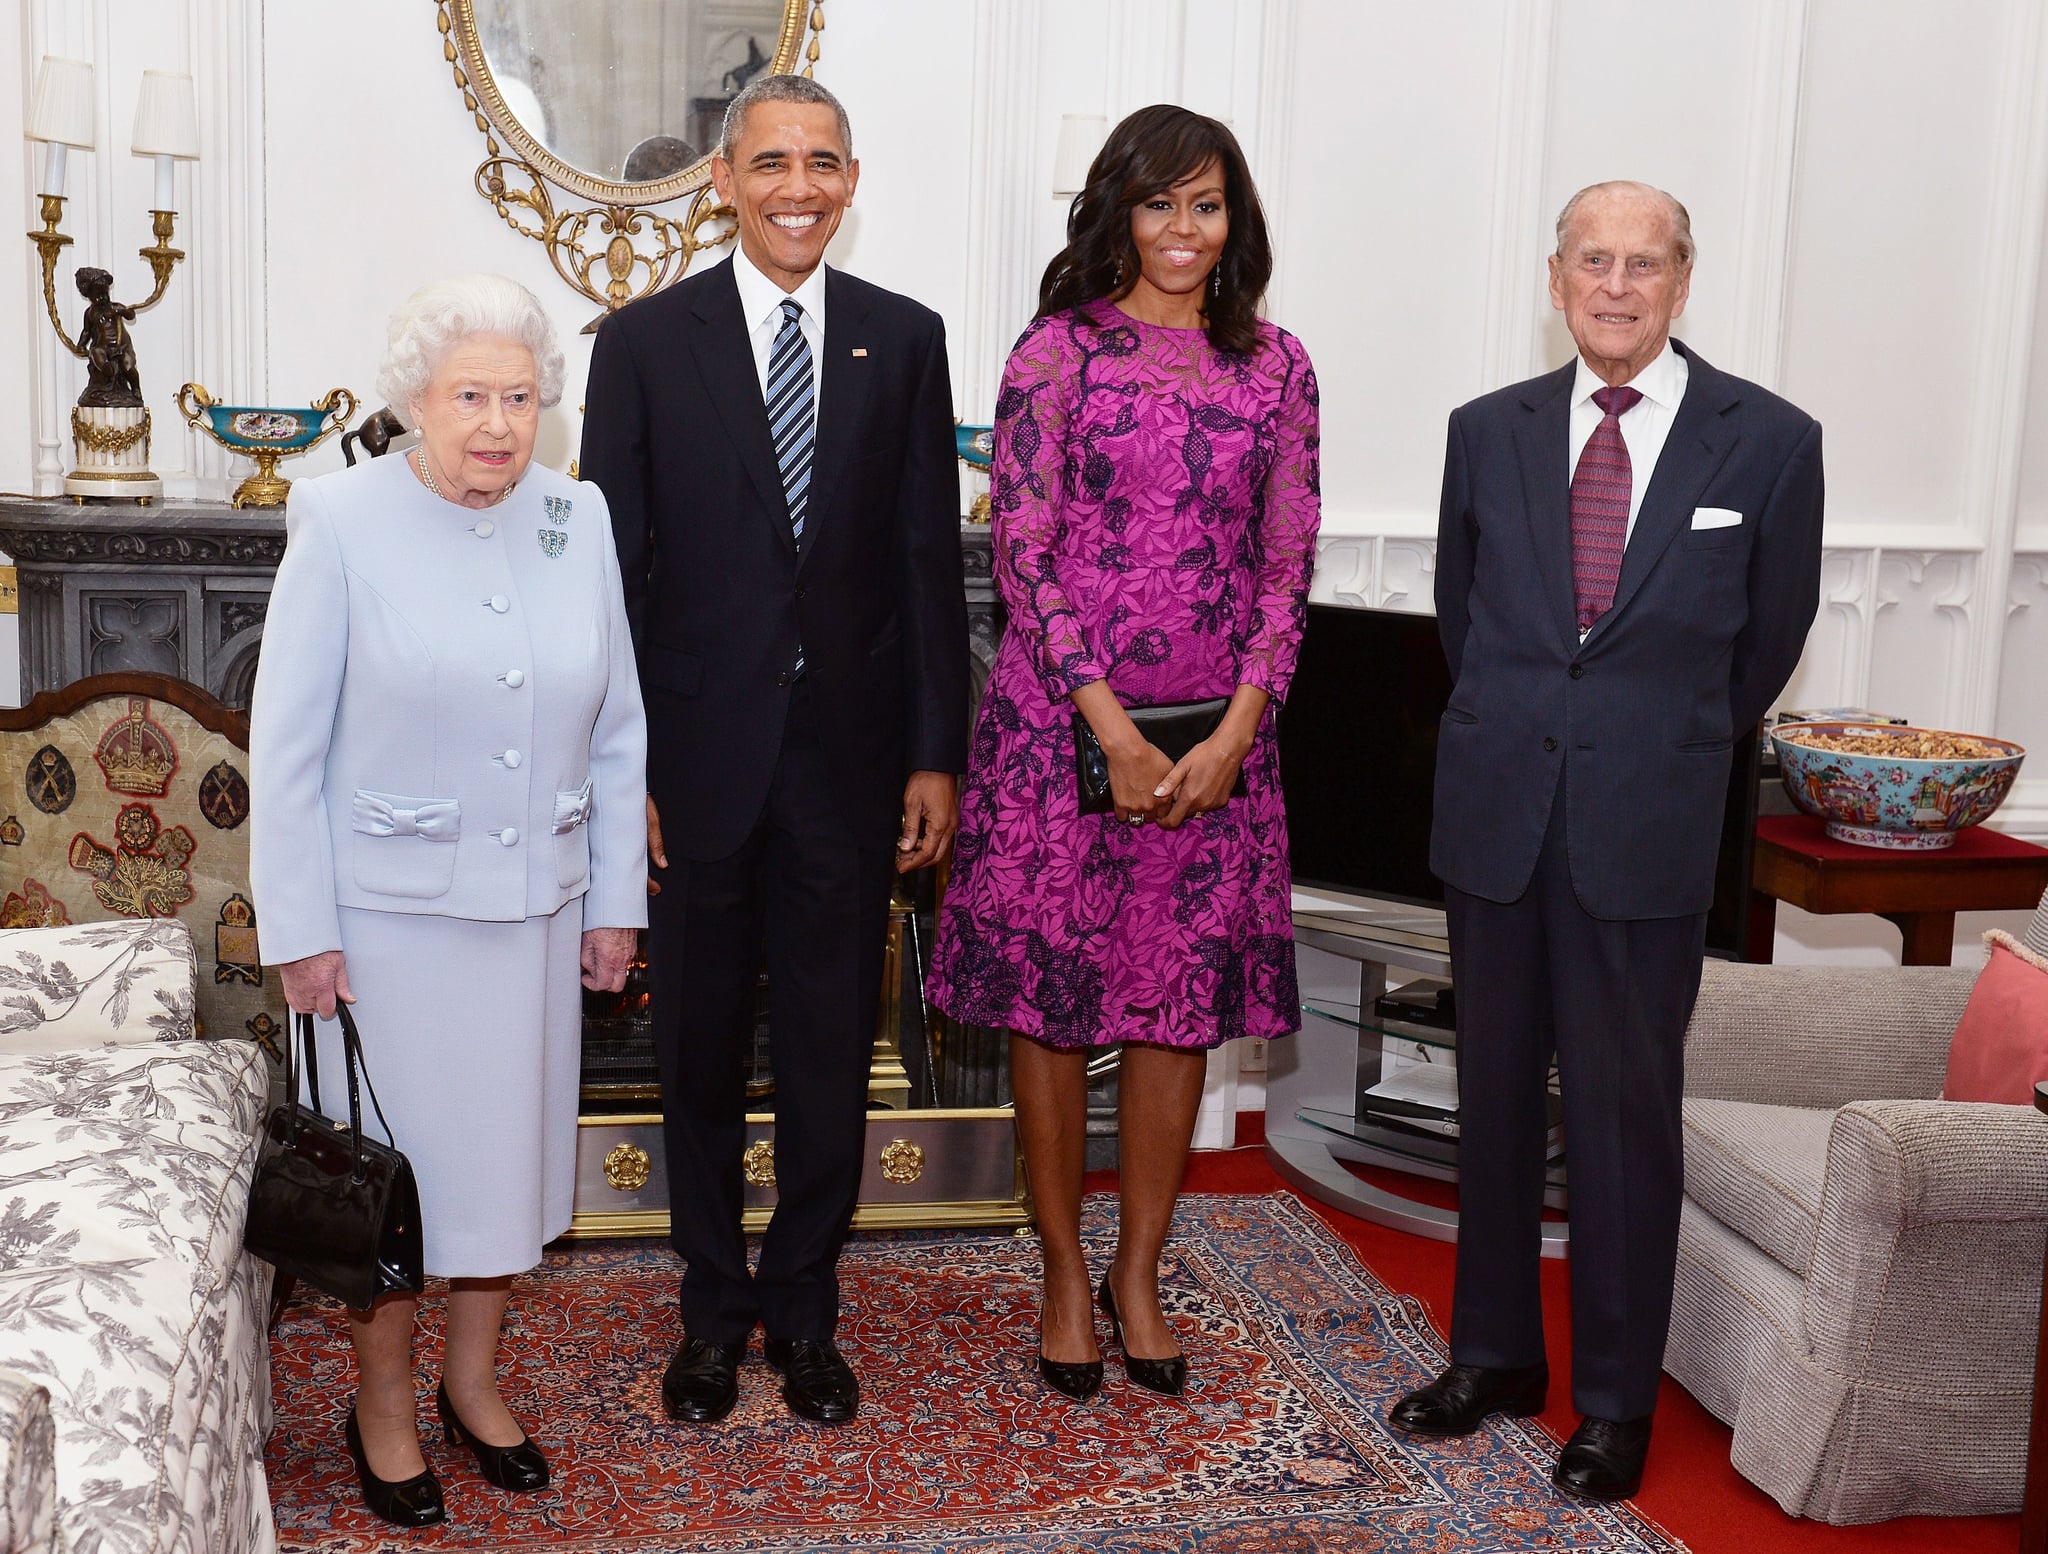 (L-R) Britain's Queen Elizabeth II, US President Barack Obama, US First Lady Michelle Obama and Prince Philip, Duke of Edinburgh, pose for a photograph in the Oak Room ahead of a private lunch at Windsor Castle in Windsor, southern England, on April, 22, 2016.  / AFP PHOTO / POOL / John Stillwell        (Photo credit should read JOHN STILLWELL/AFP via Getty Images)